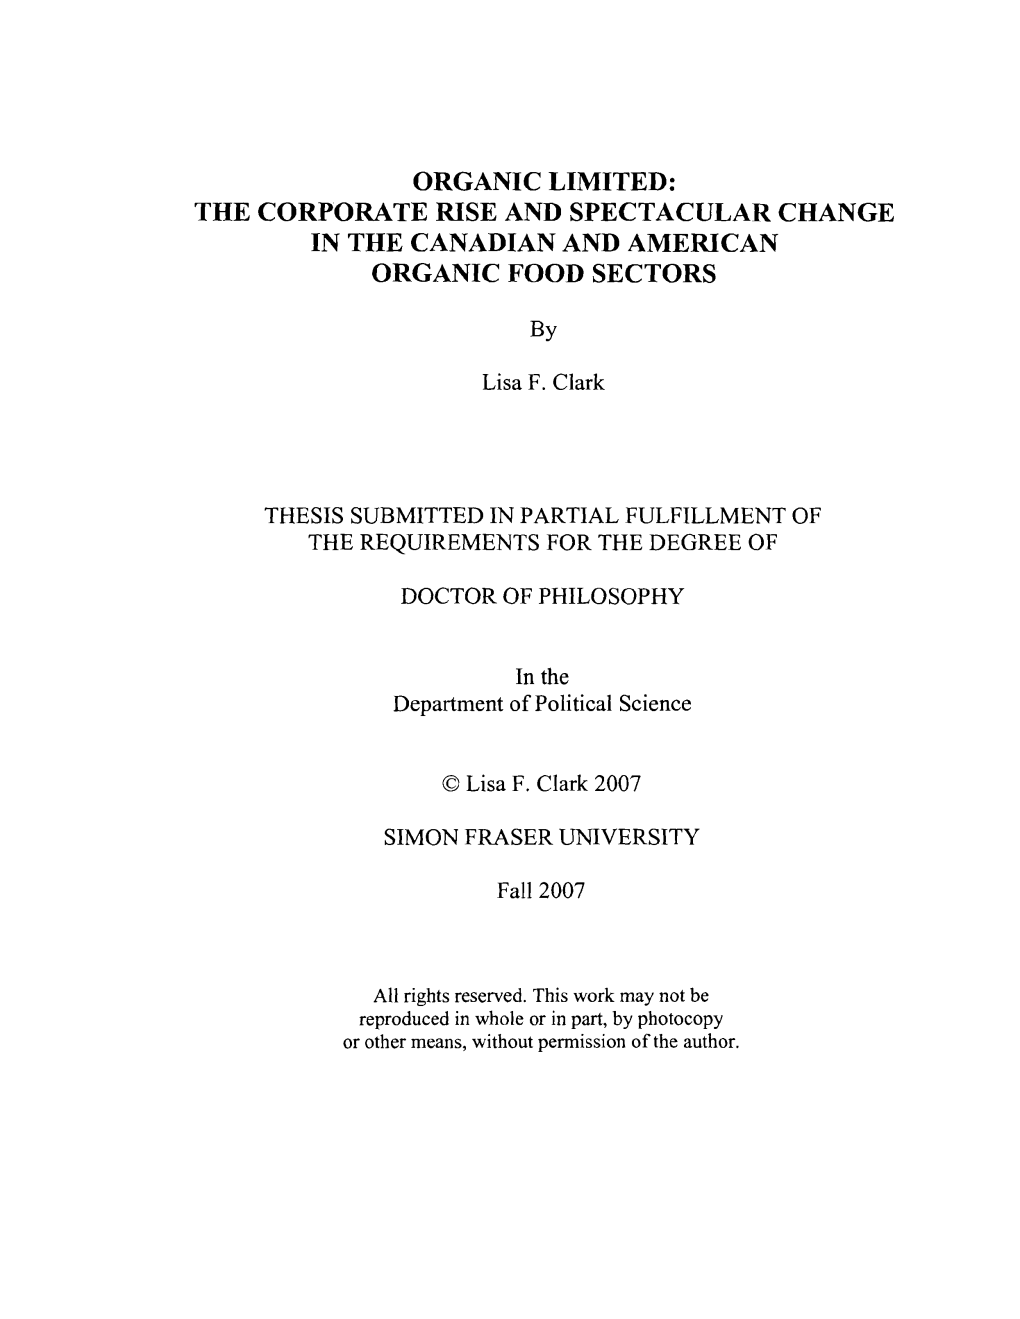 Organic Limited: the Corporate Rise and Spectacular Change in the Canadian and American Organic Food Sectors